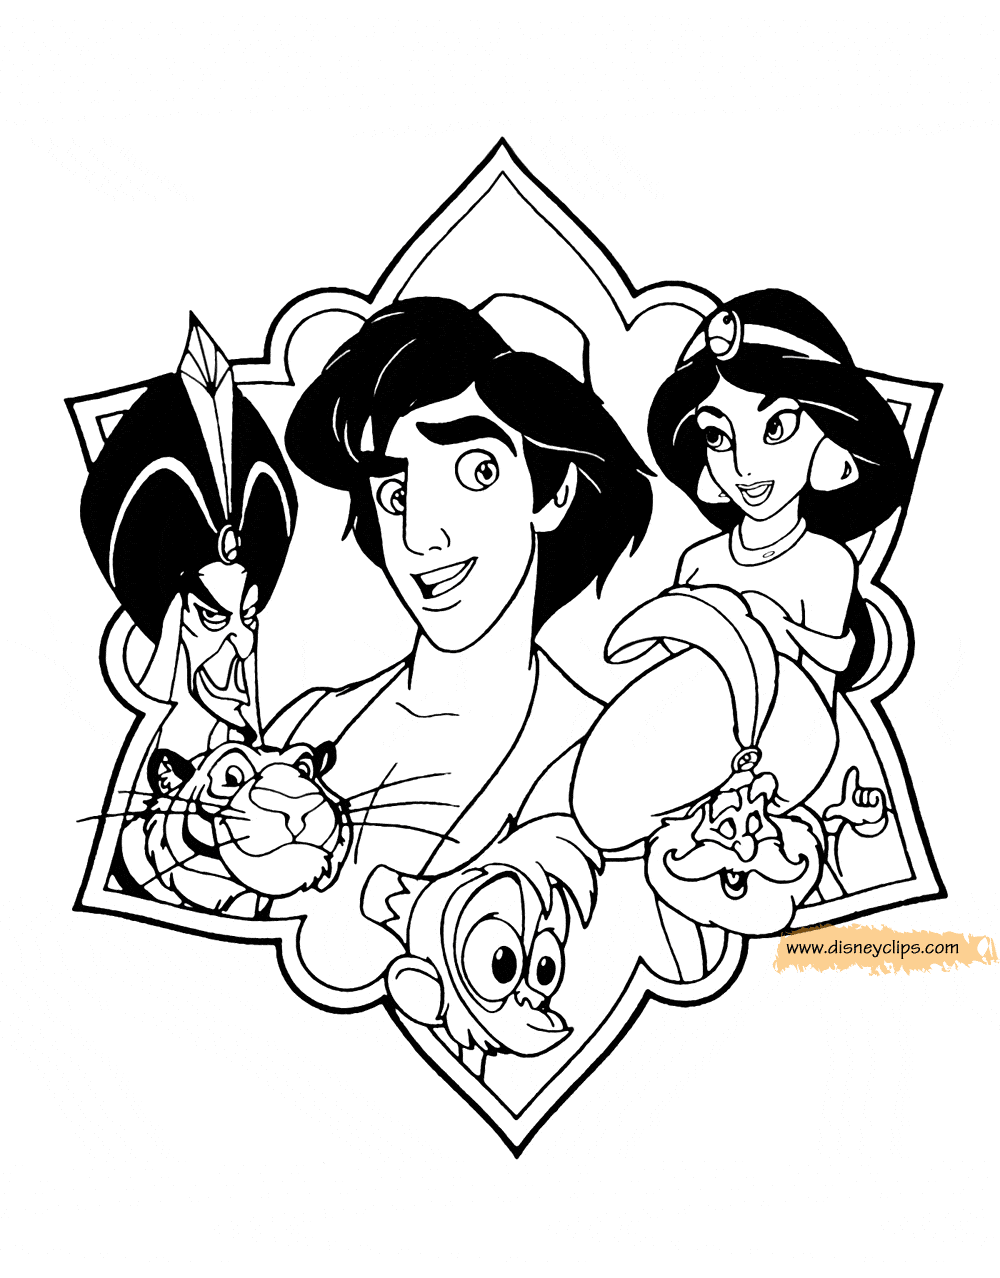 Aladdin Coloring Pages | Disneyclips.com